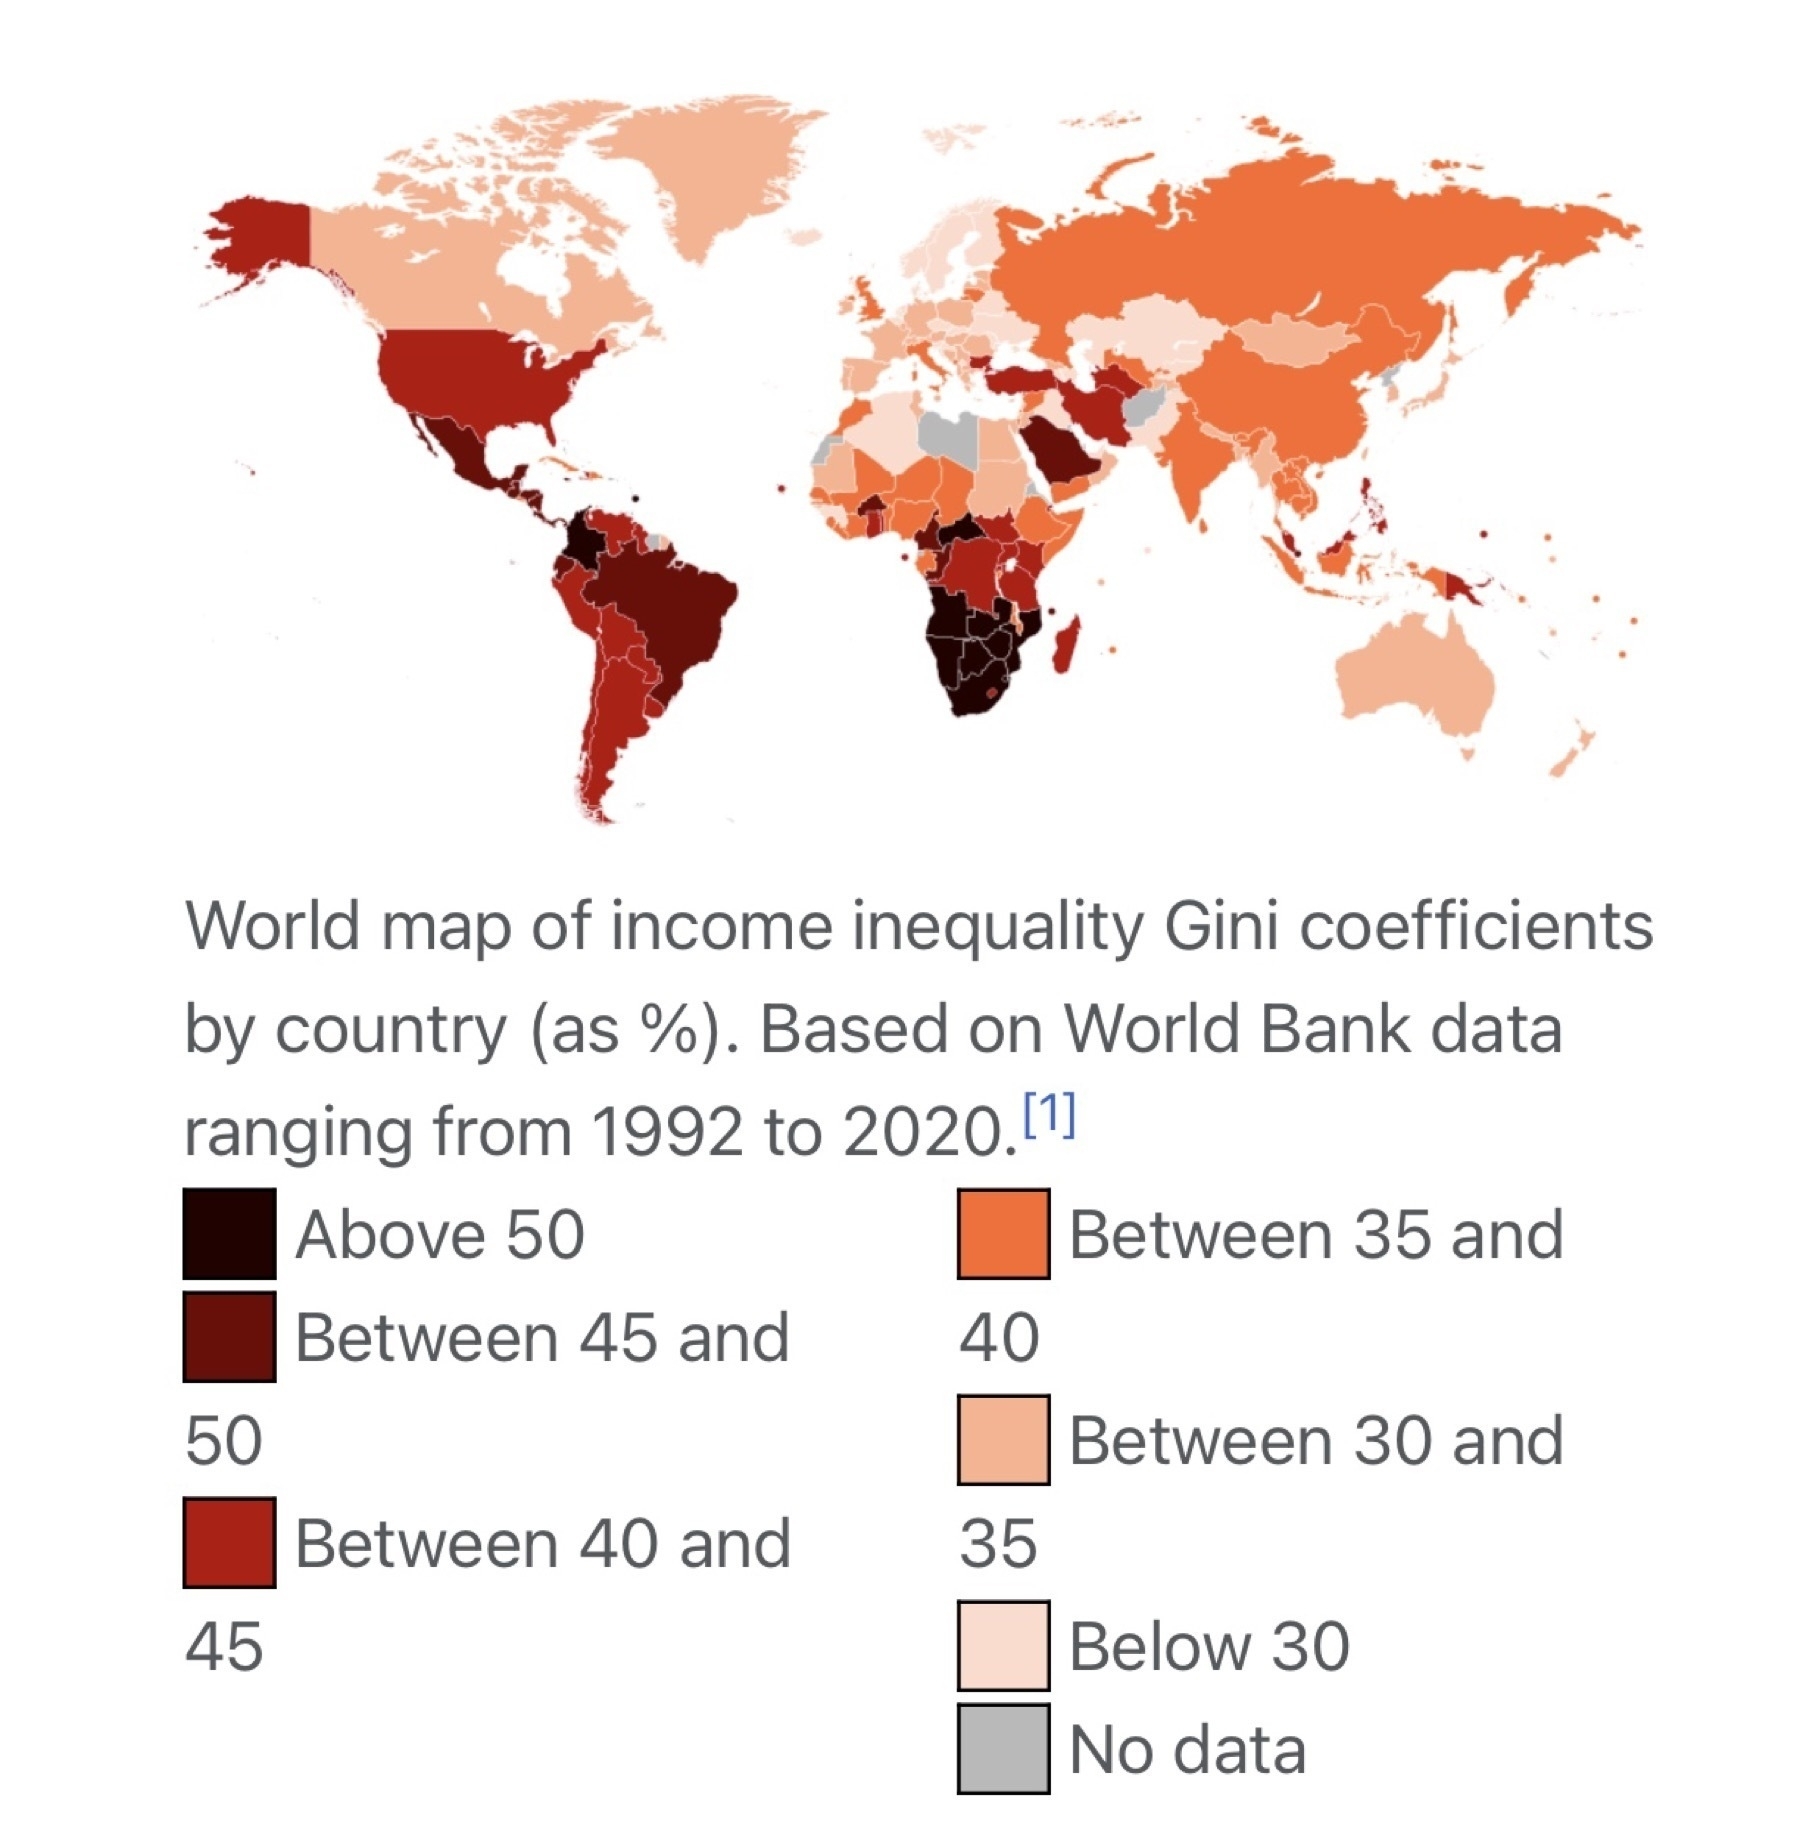 World map of income inequality Gini coefficients by country (as %). Based on World Bank data ranging from 1992 to 2020.